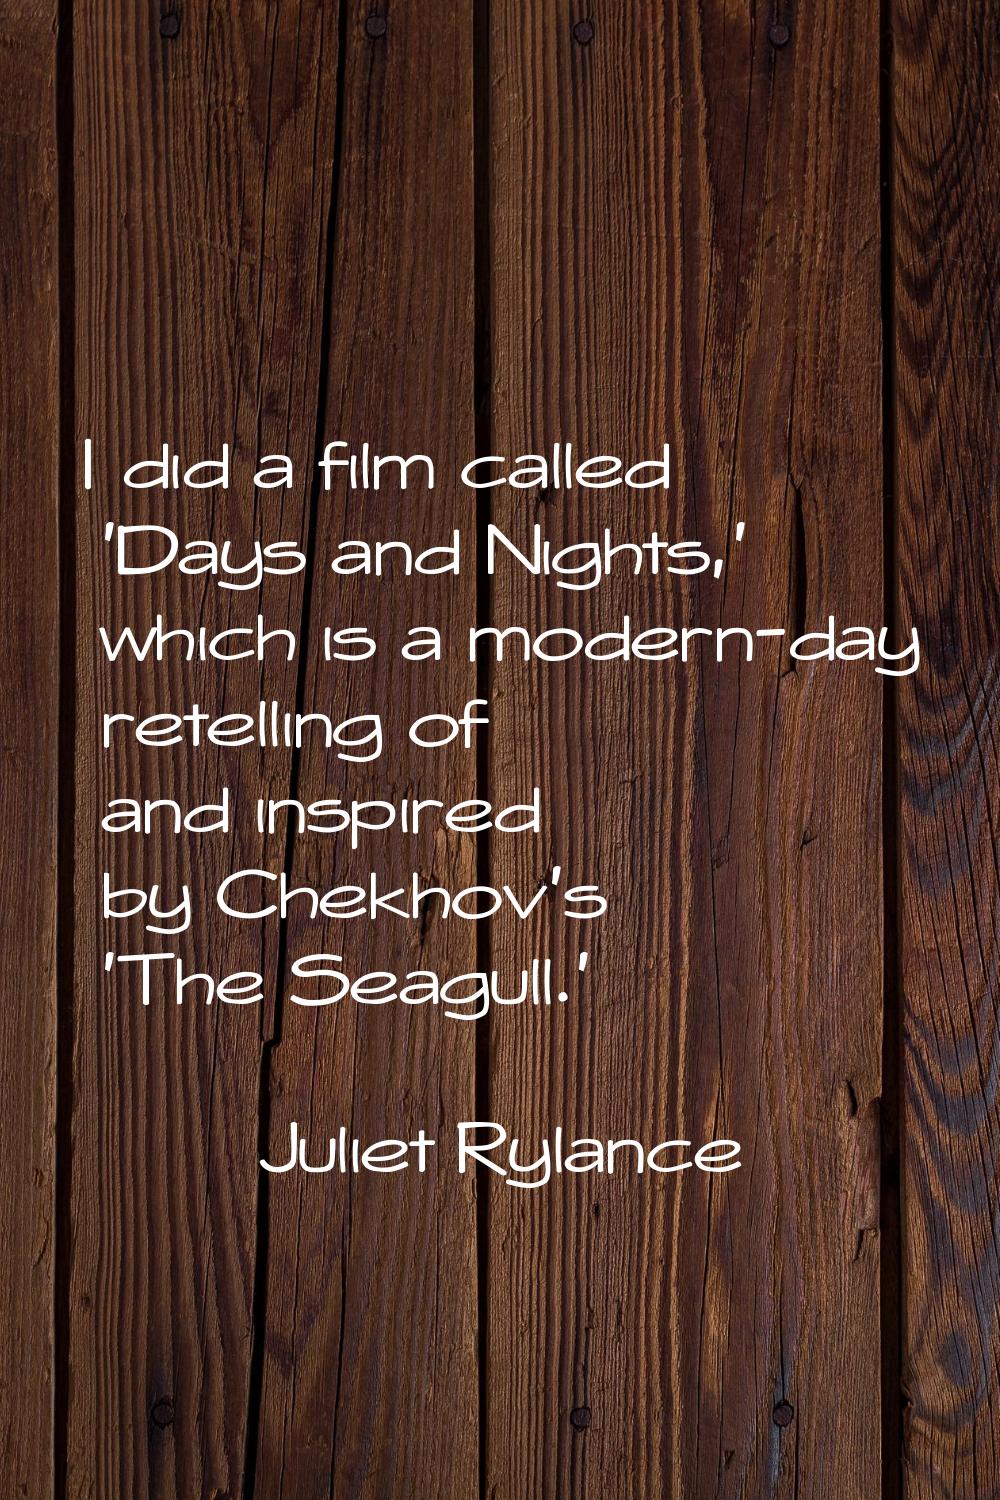 I did a film called 'Days and Nights,' which is a modern-day retelling of and inspired by Chekhov's